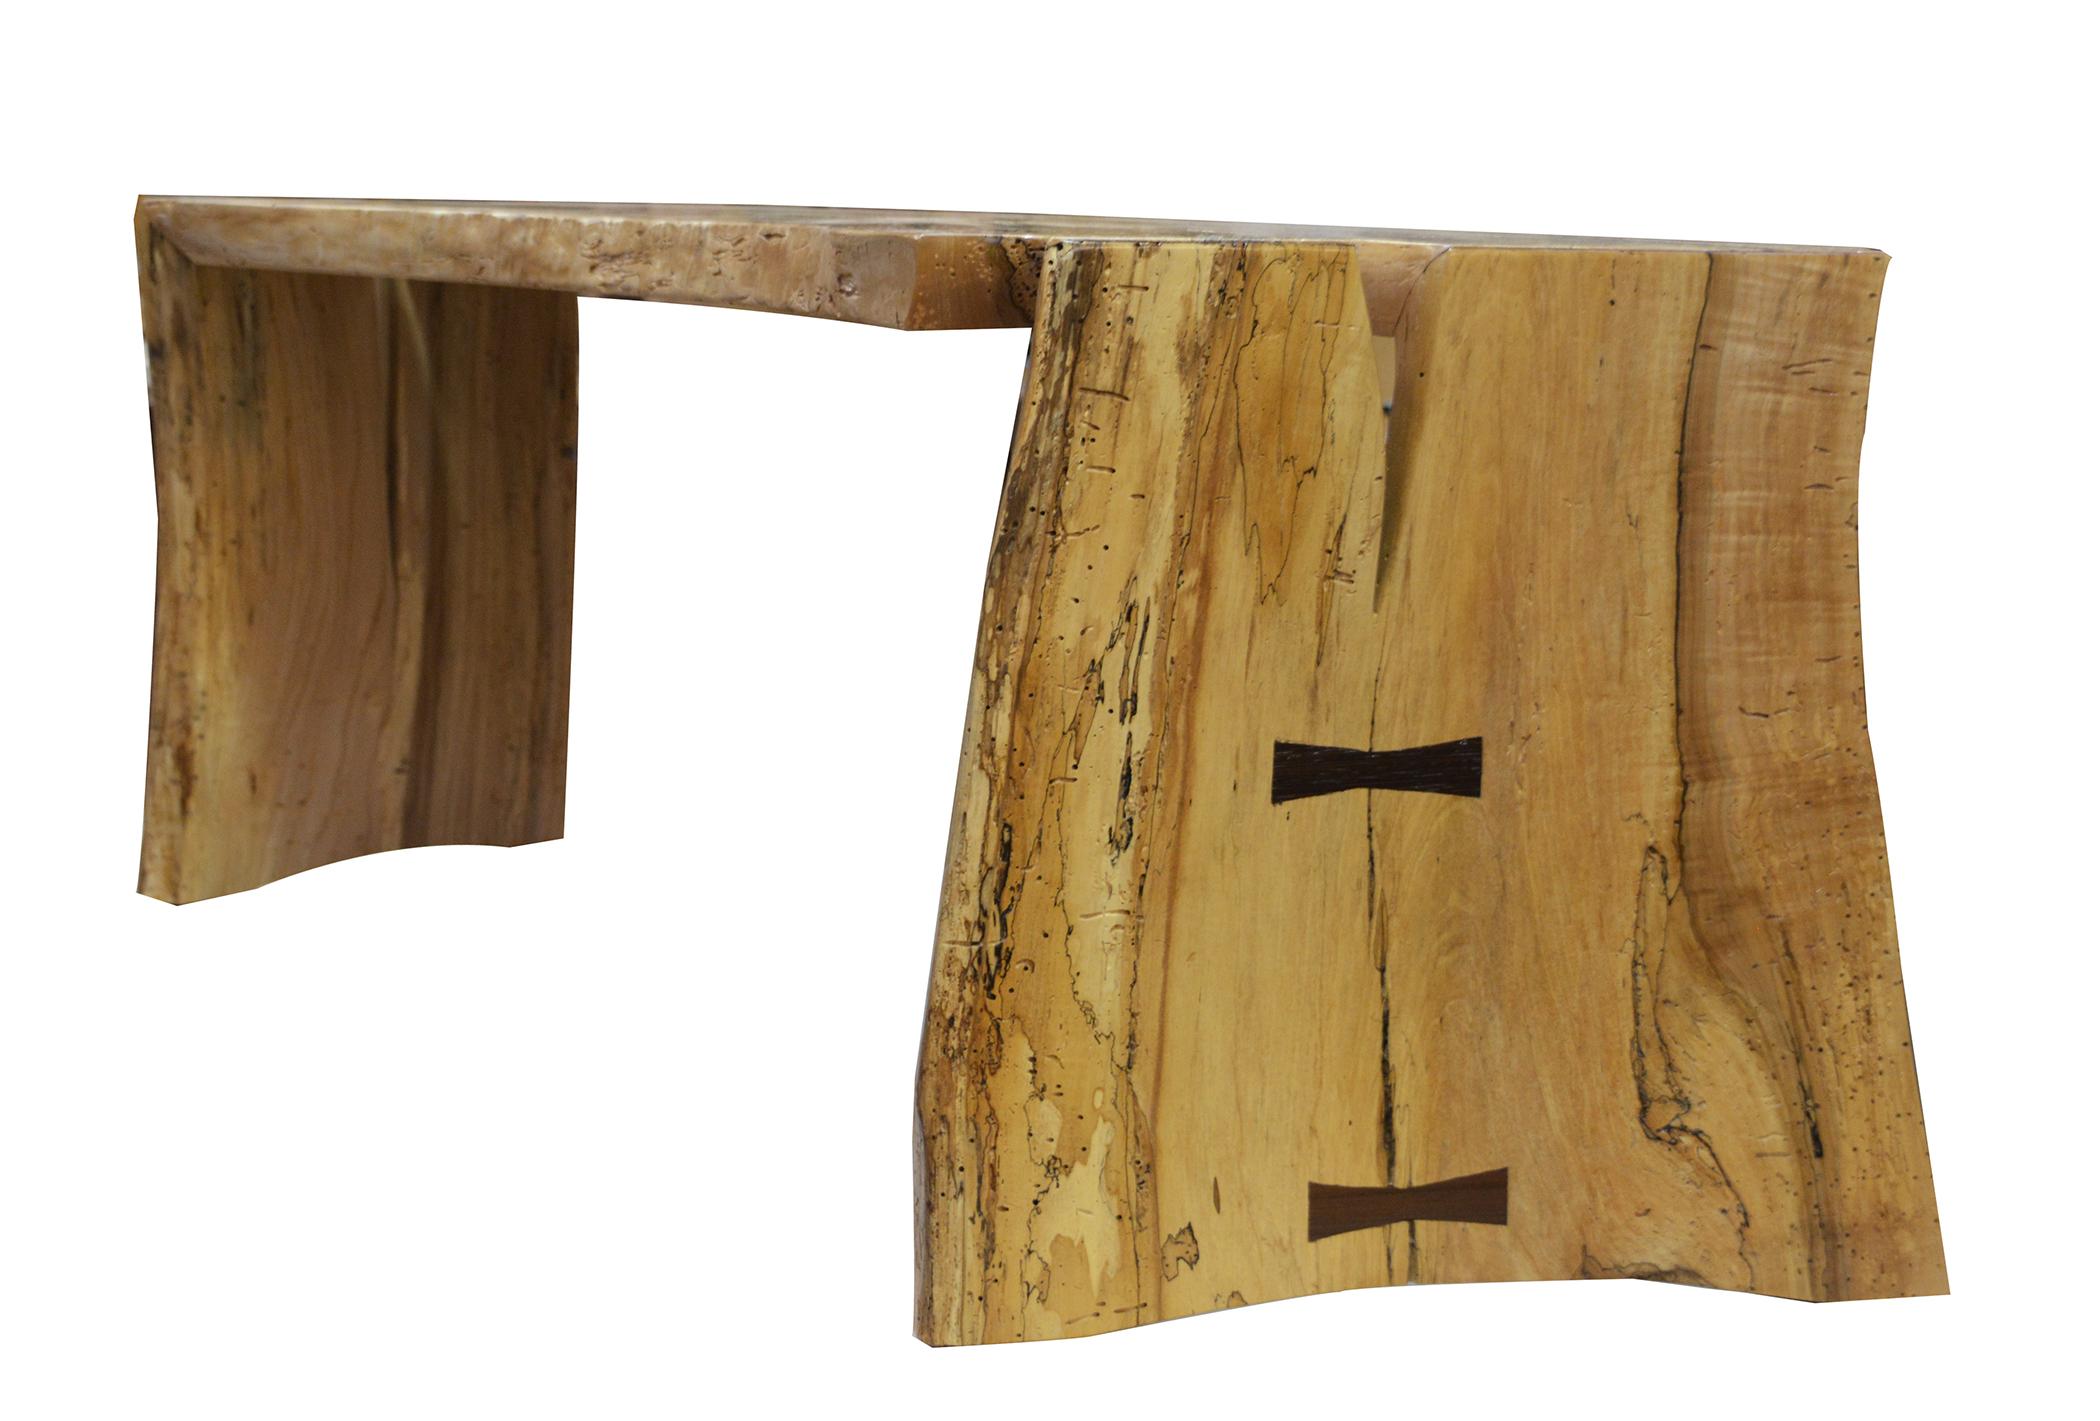 Lerner Dining Room Table by American Studio Craft Artist David N. Ebner In New Condition For Sale In Bellport, NY